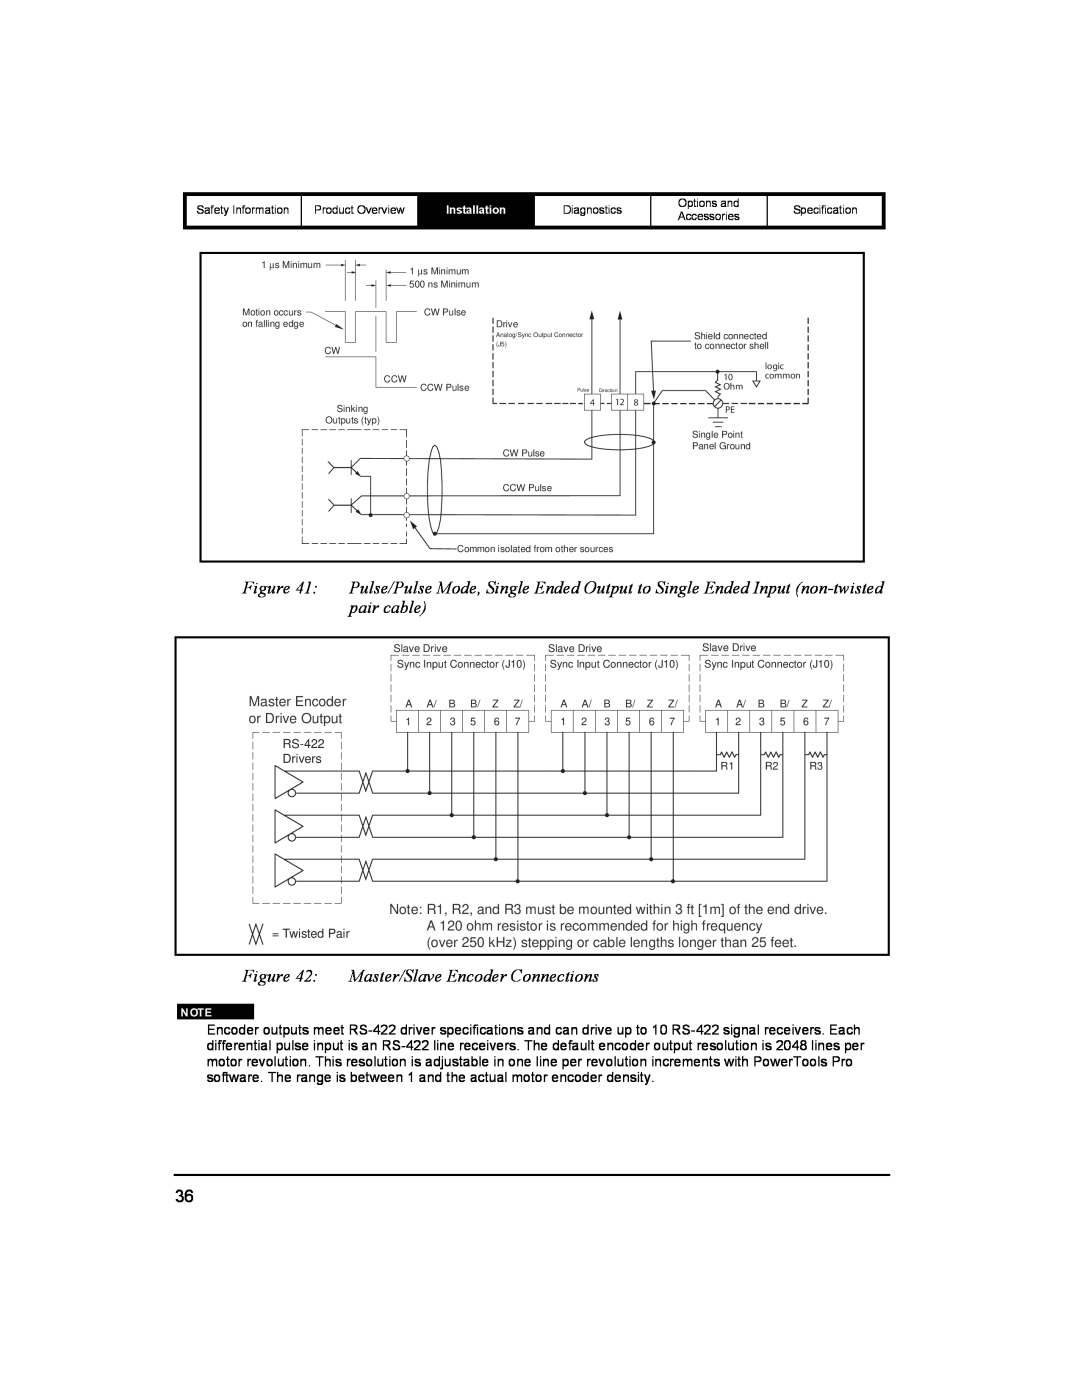 Emerson 400518-01 installation manual Master/Slave Encoder Connections, Master Encoder, or Drive Output 